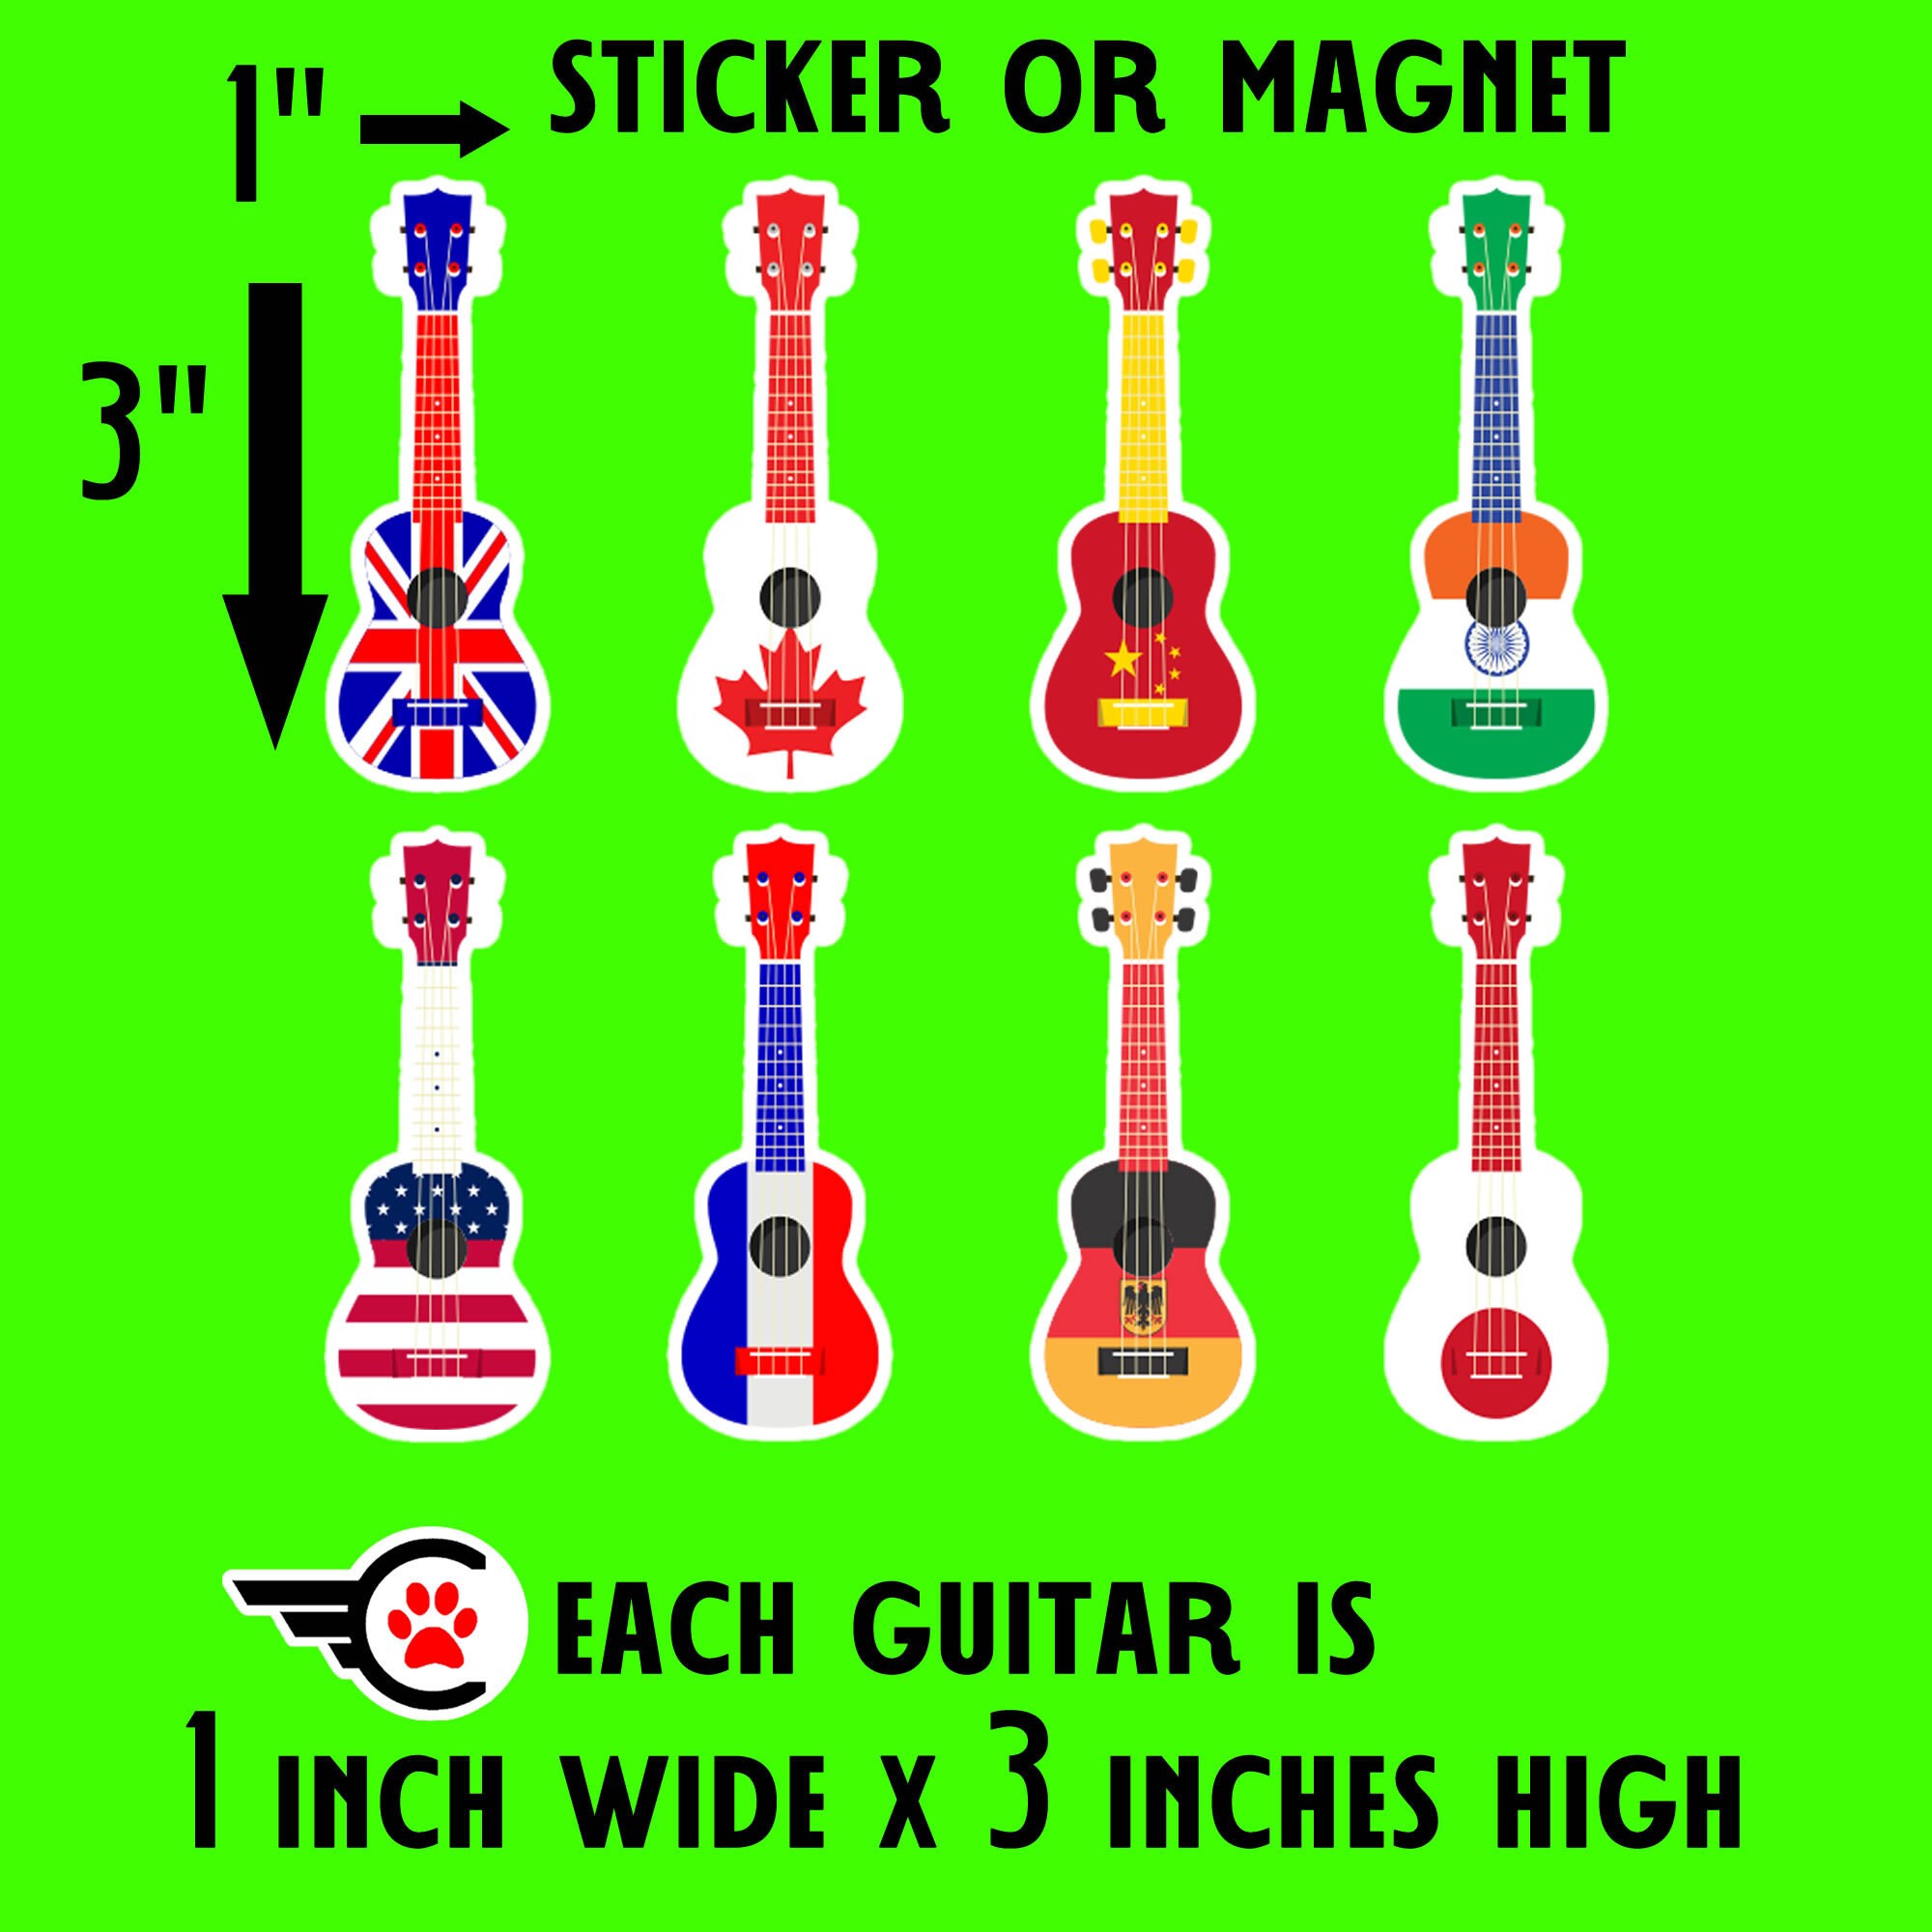 8 Guitar stickers 1